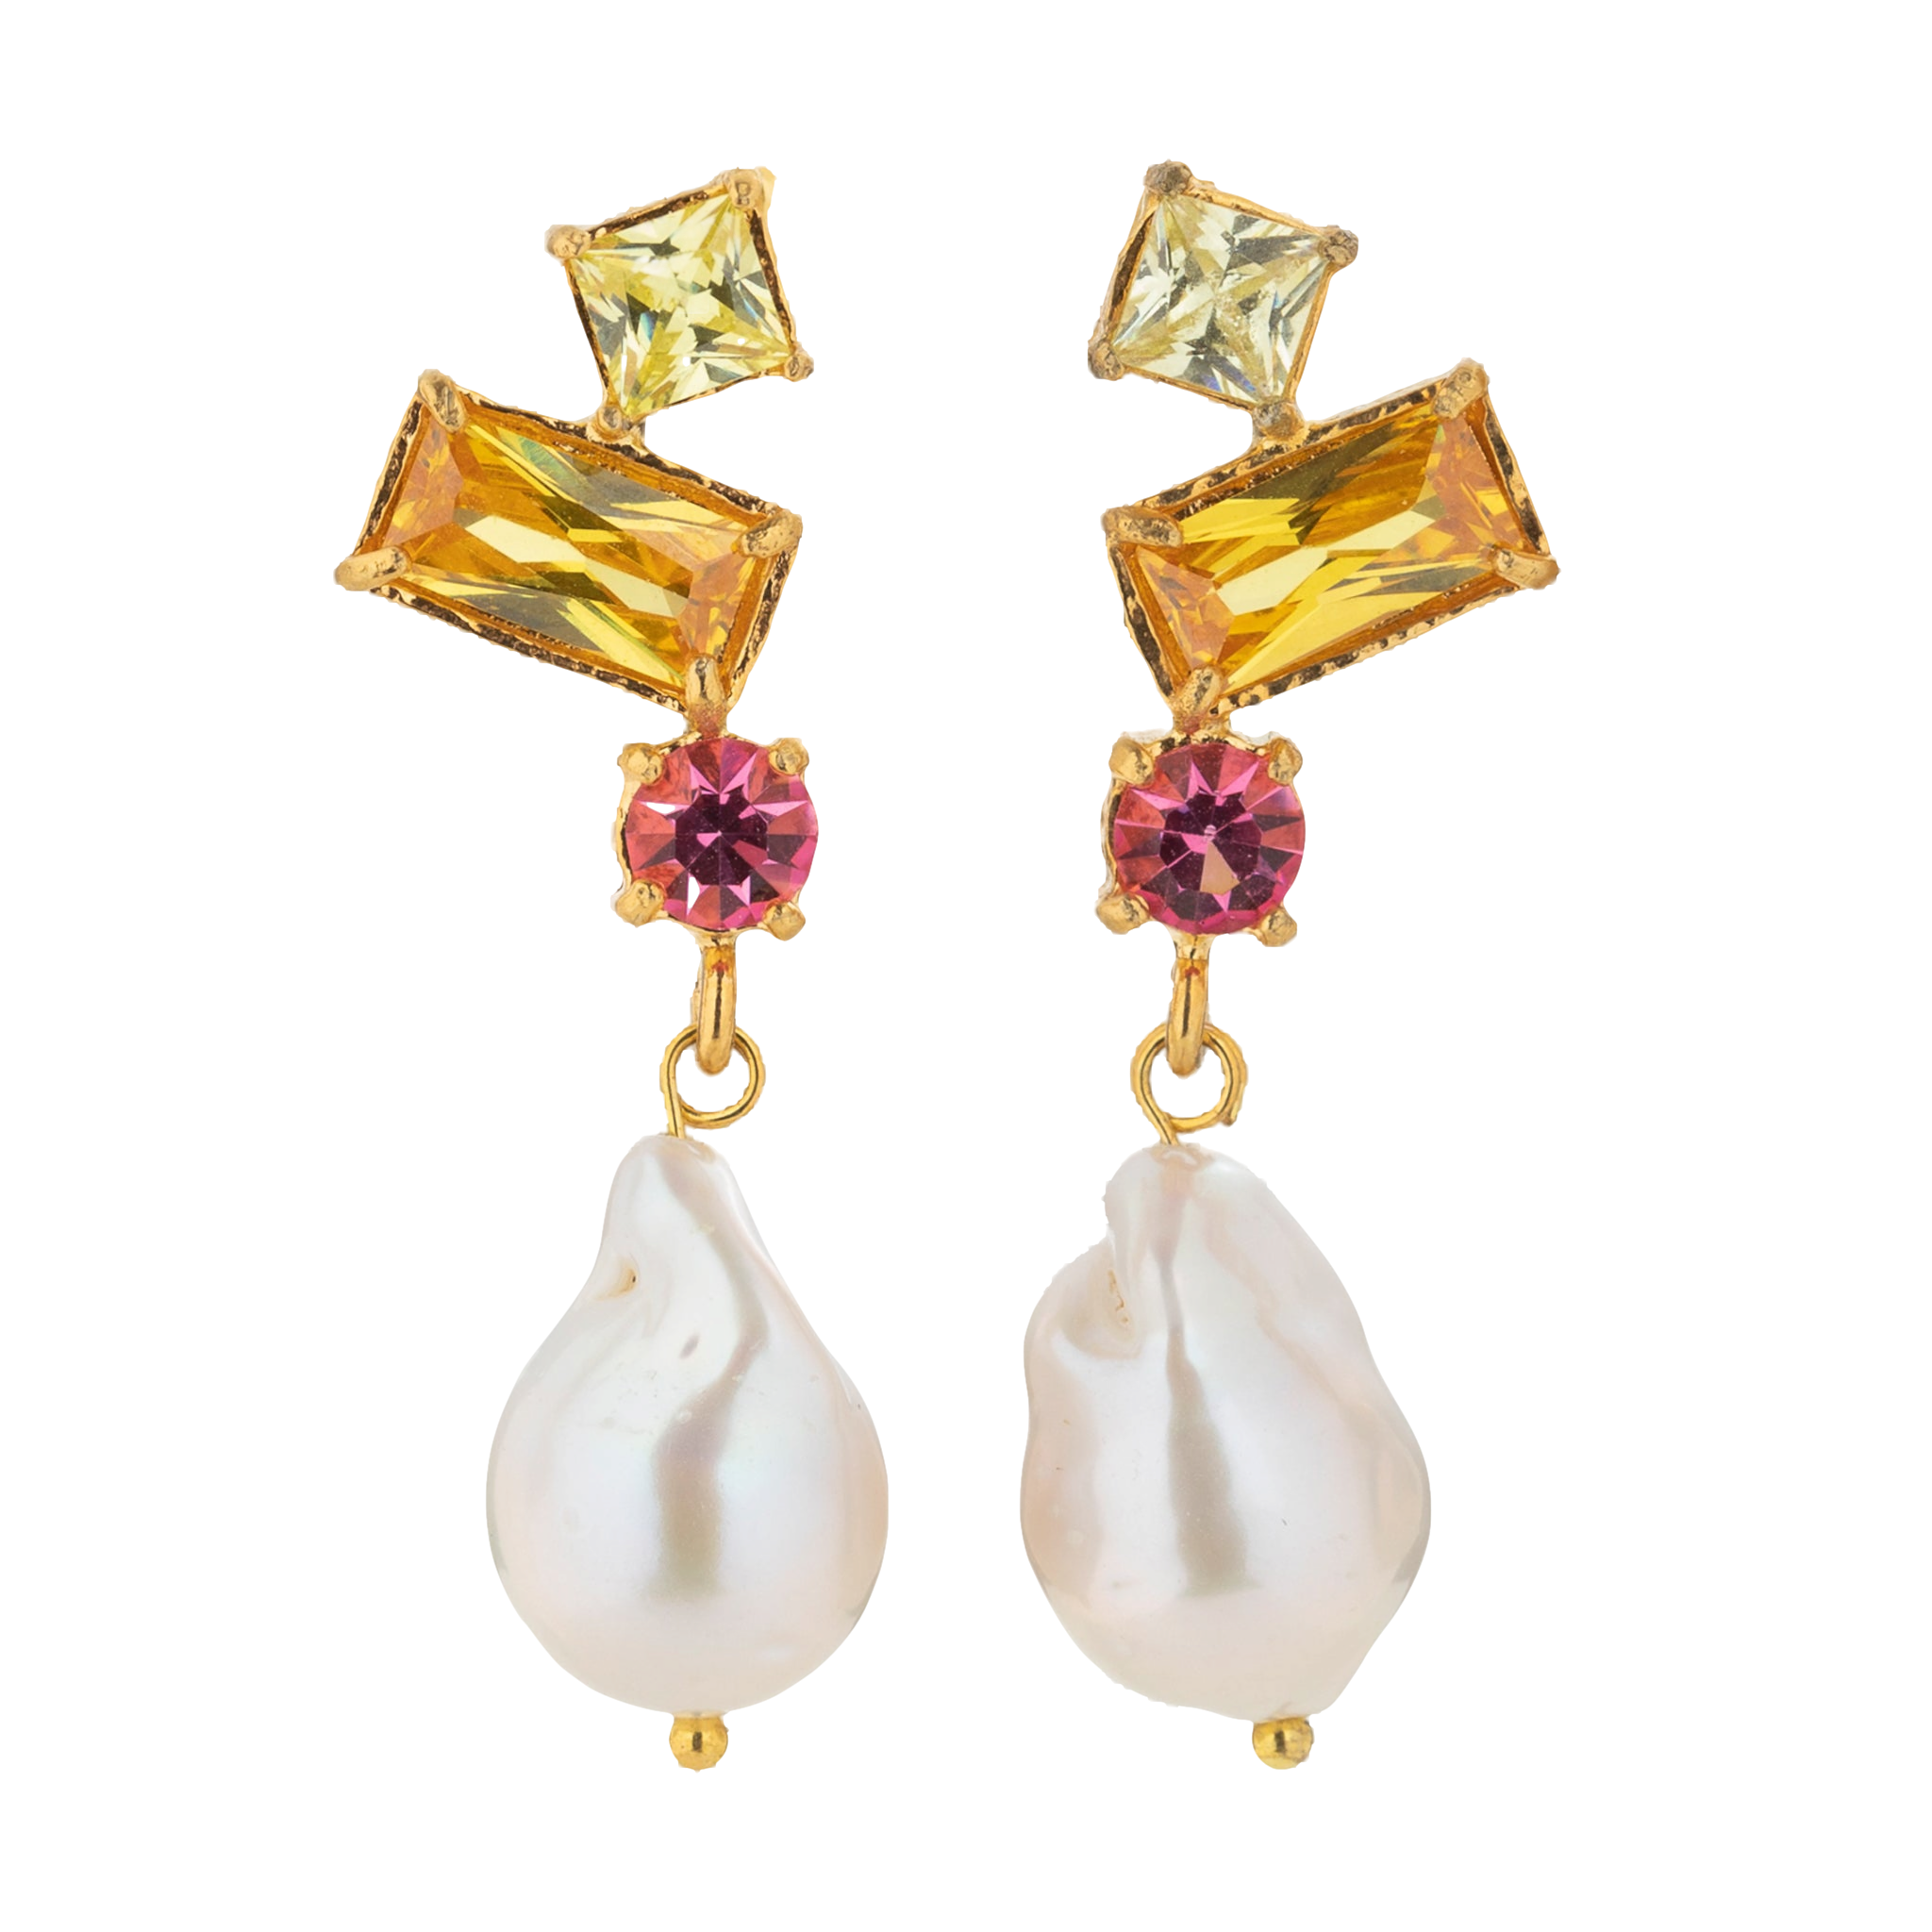 Christie Nicolaides Laia Earrings Yellow In Gold